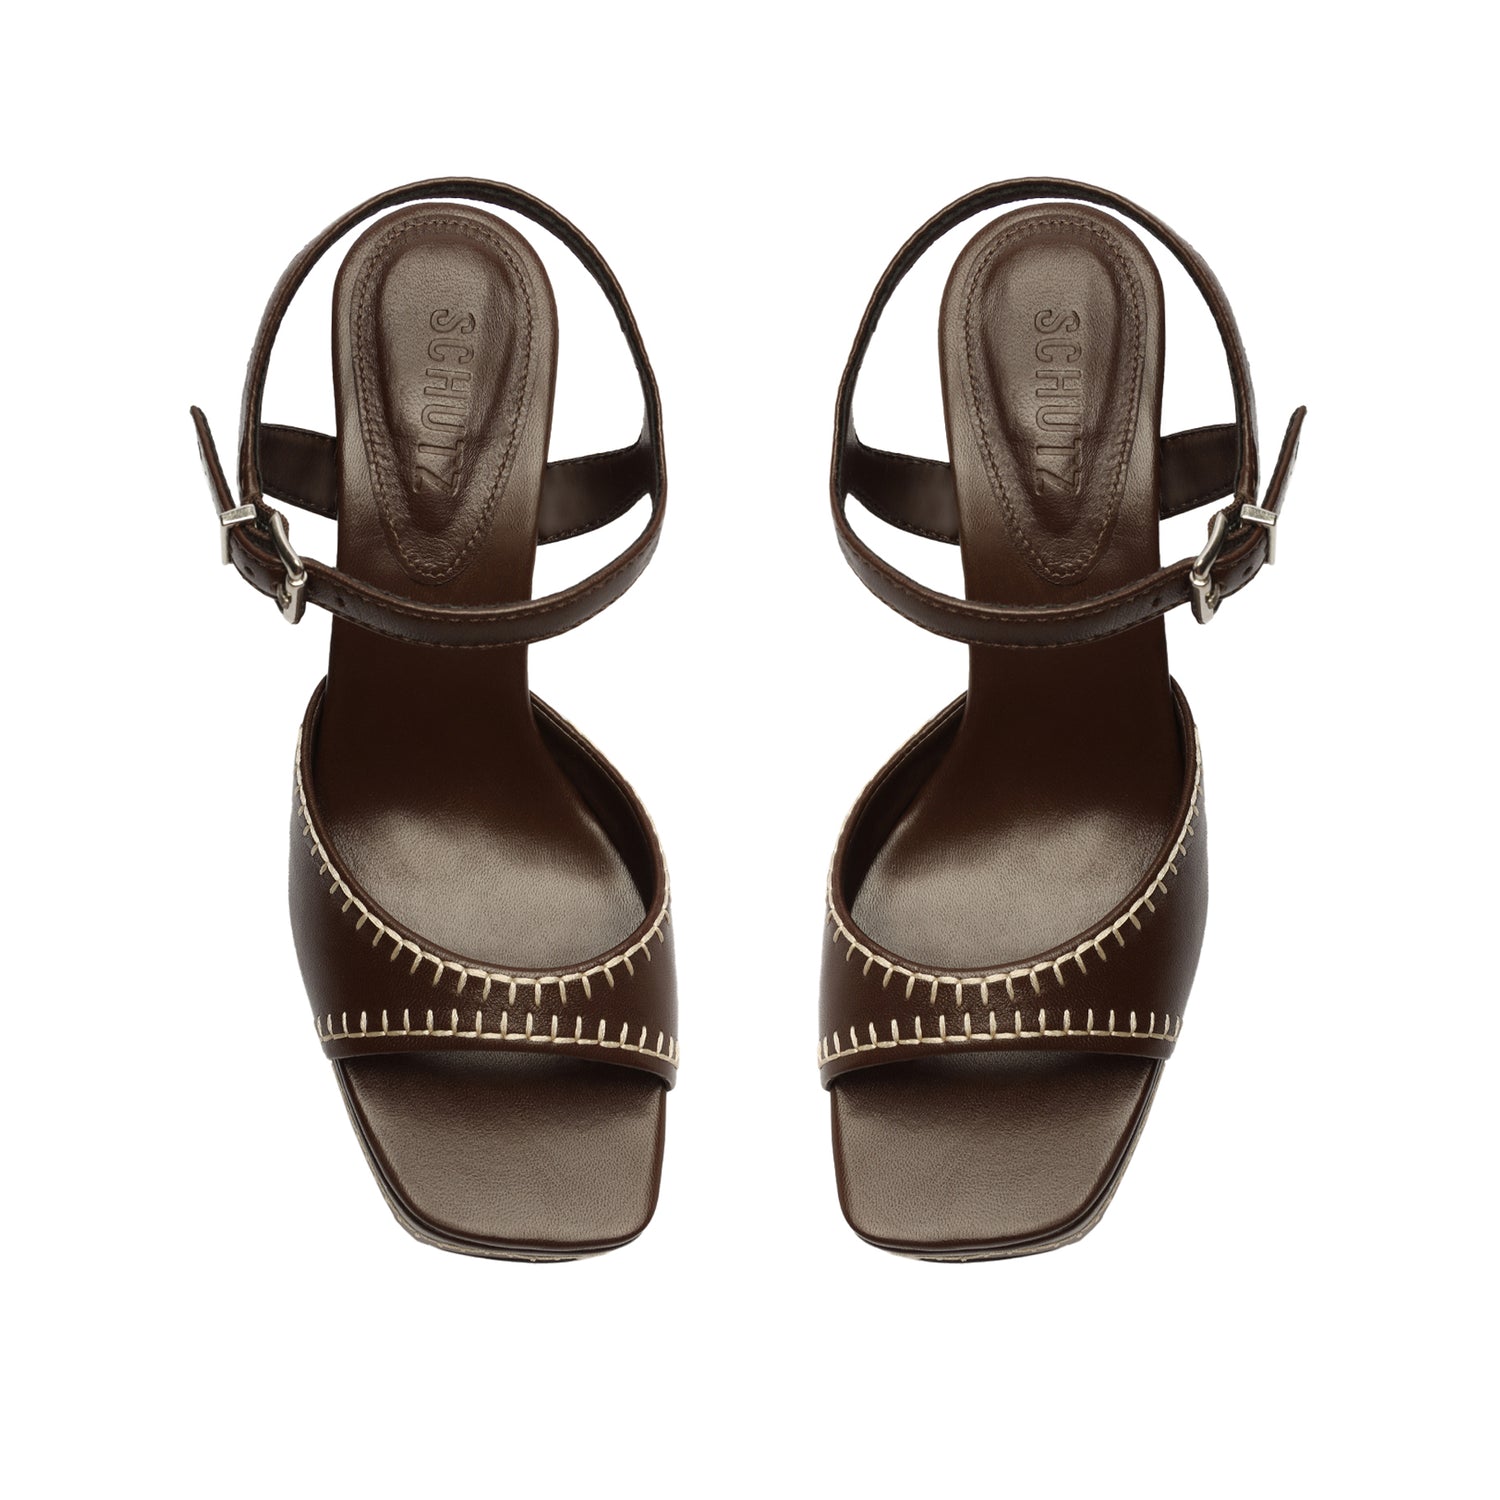 Lenne Indie Nappa Leather Sandal Sandals OLD    - Schutz Shoes